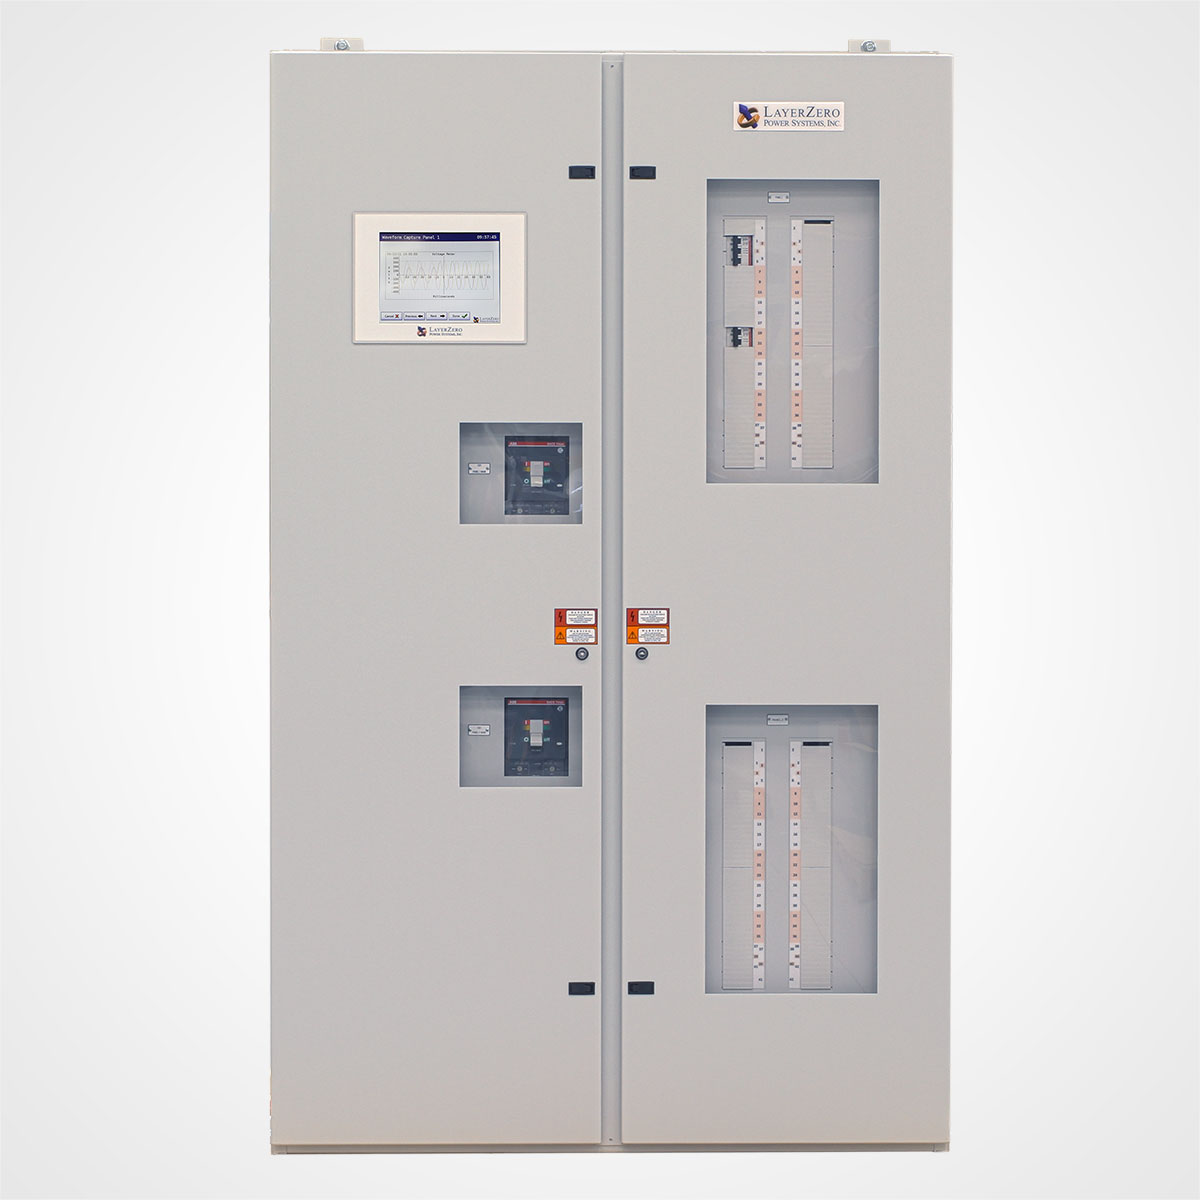 The LayerZero Series 70: ePanel-2 Wall-Mounted Power Panel with the Doors Closed.